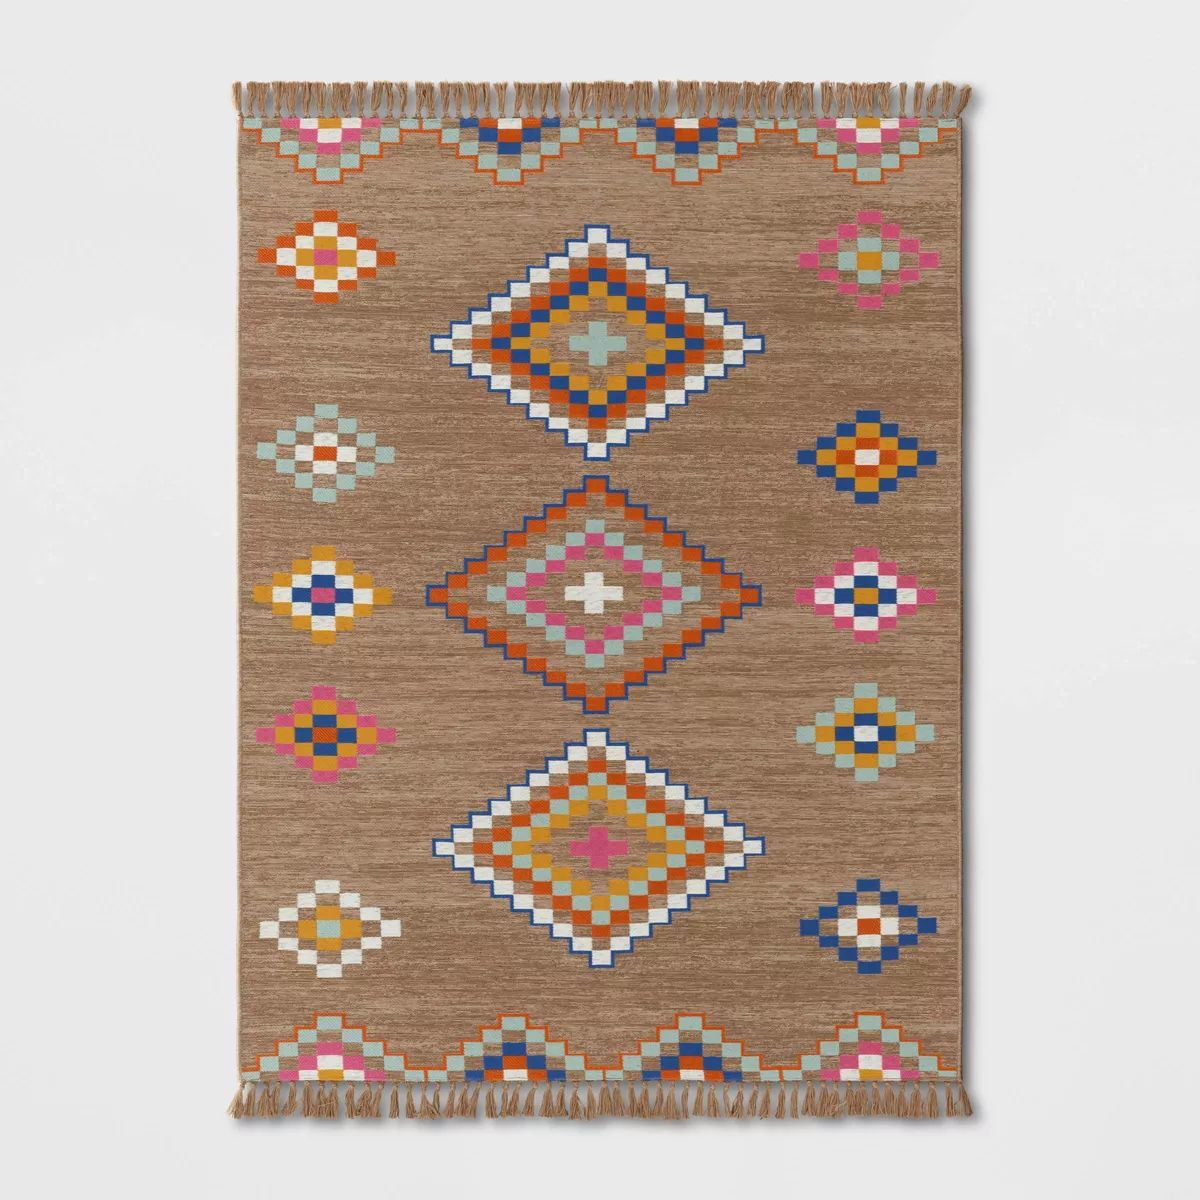 Southwest Tapestry Rectangular Woven Outdoor Area Rug Multicolor Brights - Threshold™ | Target